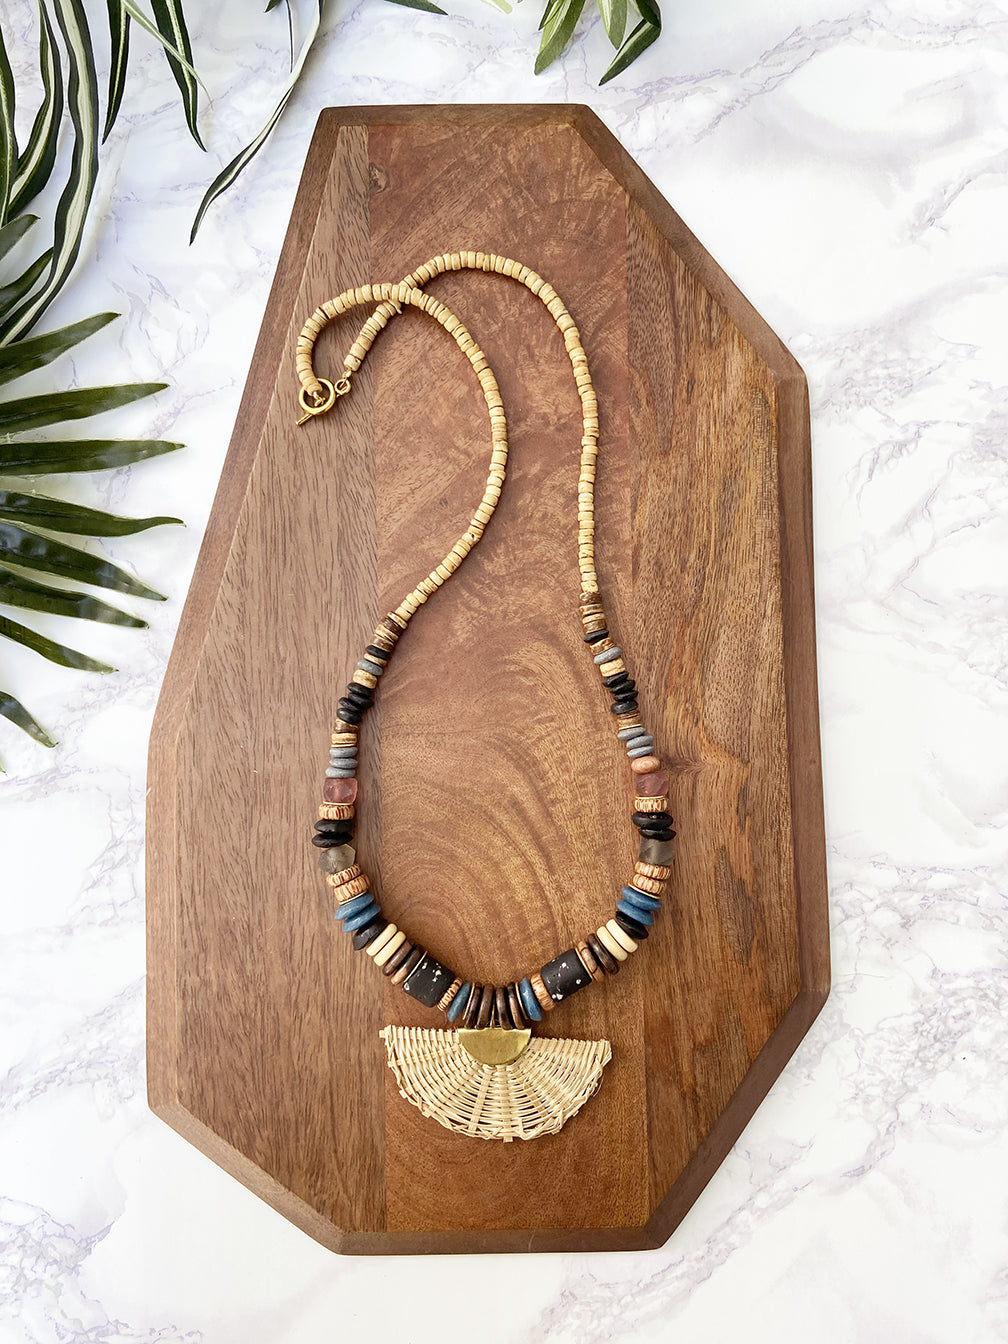 globetrotter necklace - black, brown and teal mix